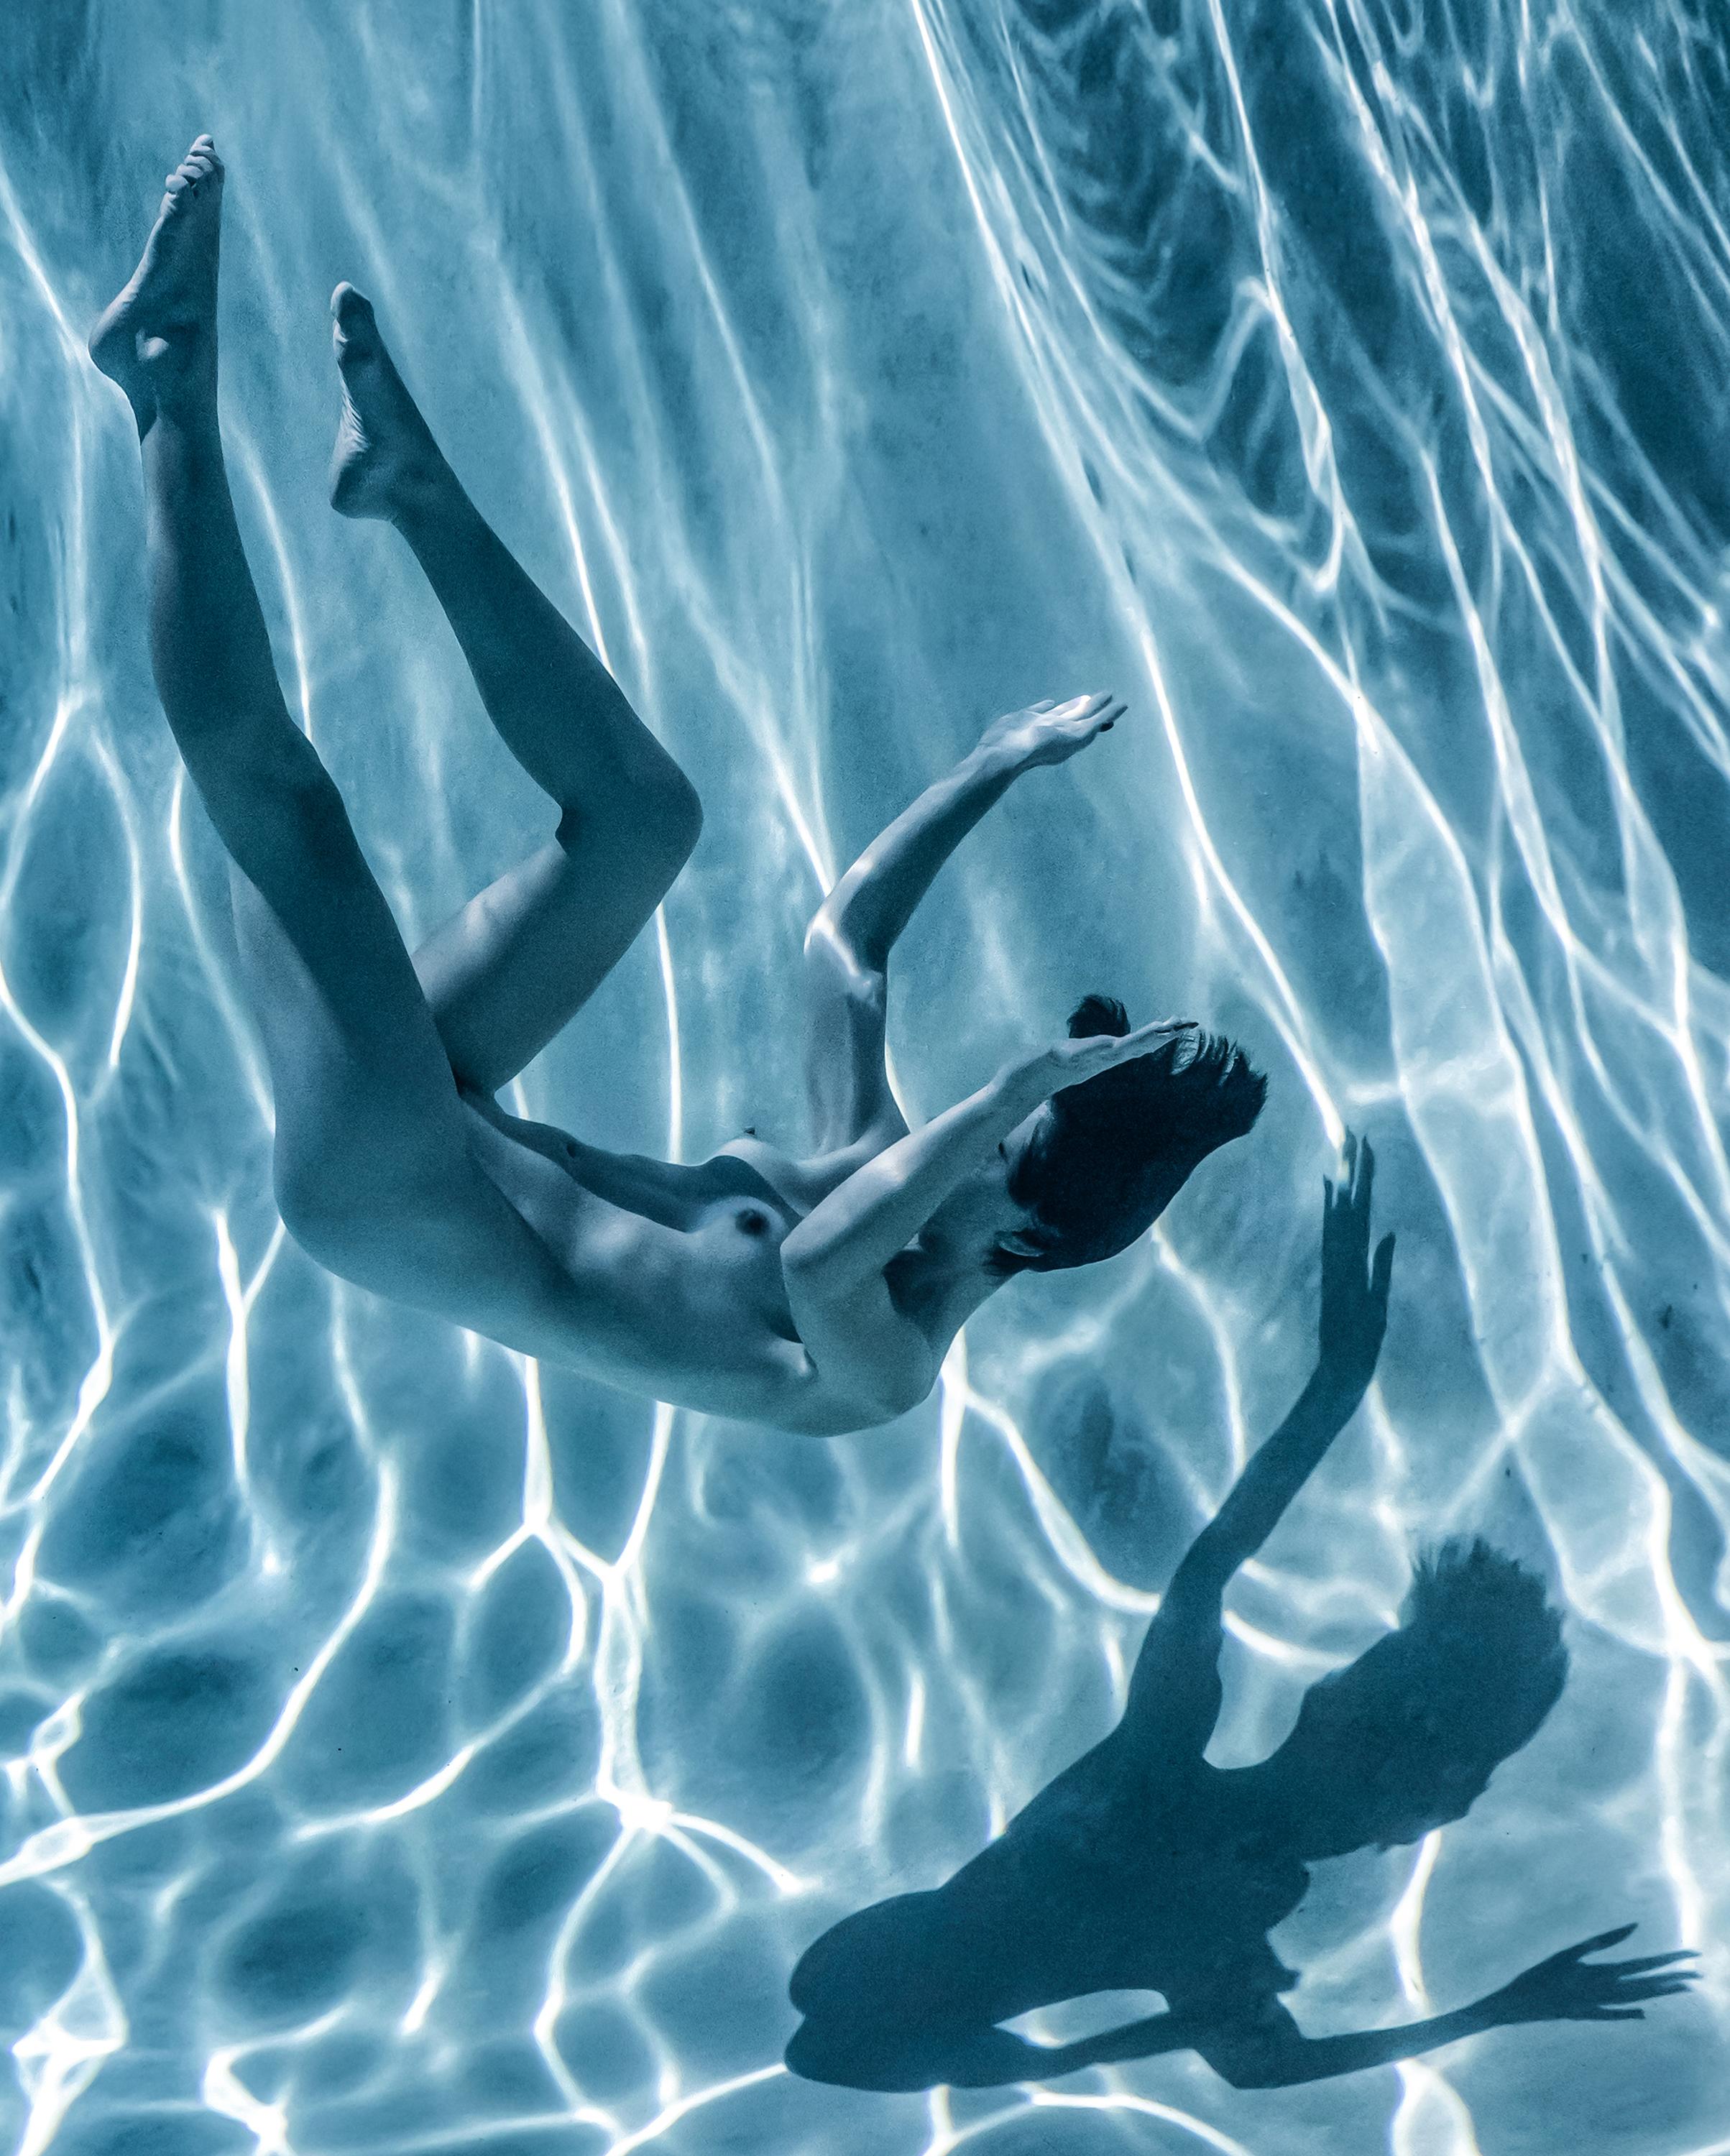 Slow Motion (blue) - underwater nude photograph - archival pigment print - Photograph by Alex Sher